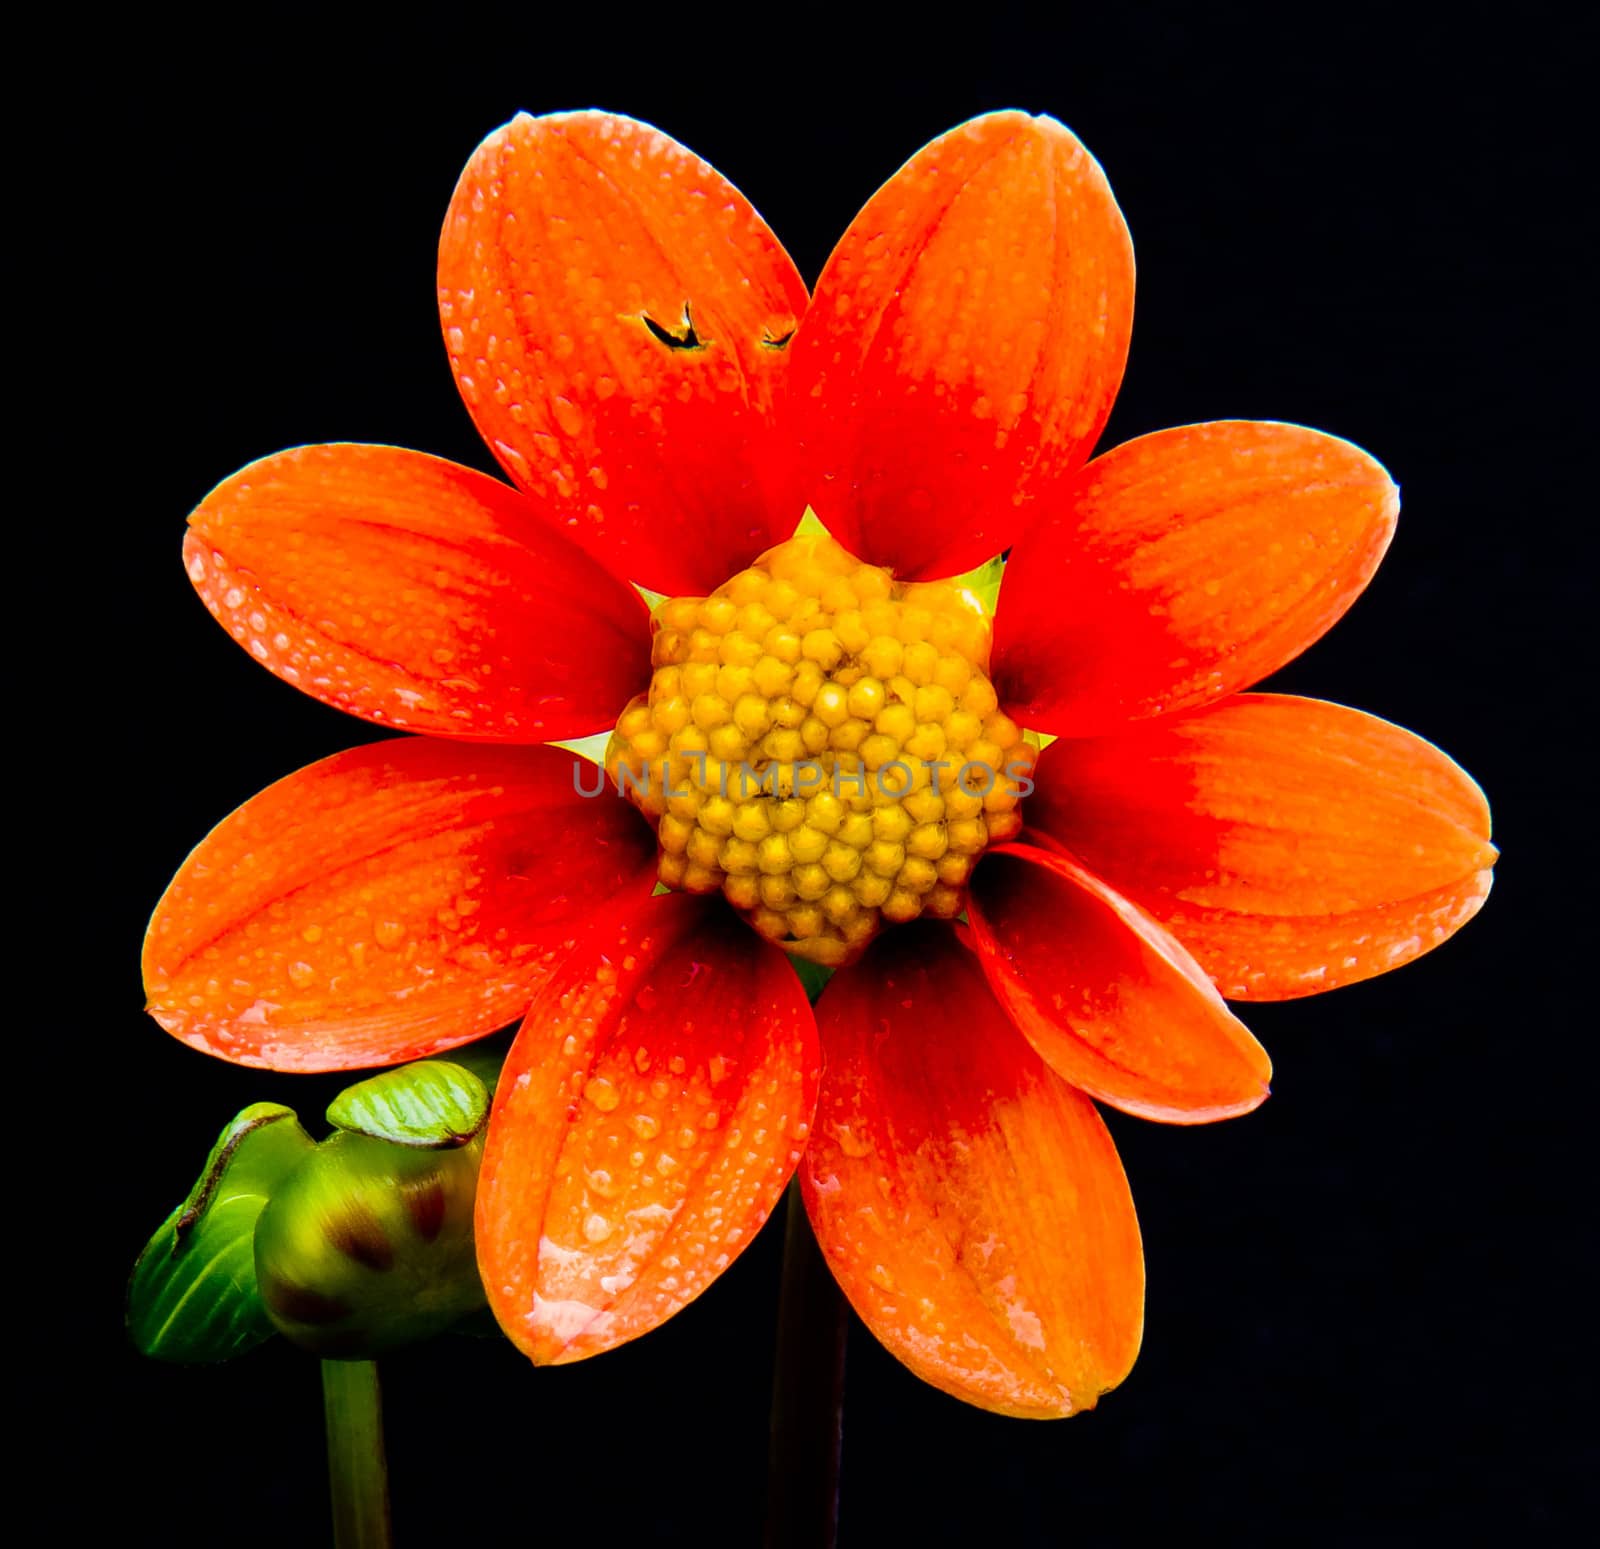 orange and yellow flower by marco_govel